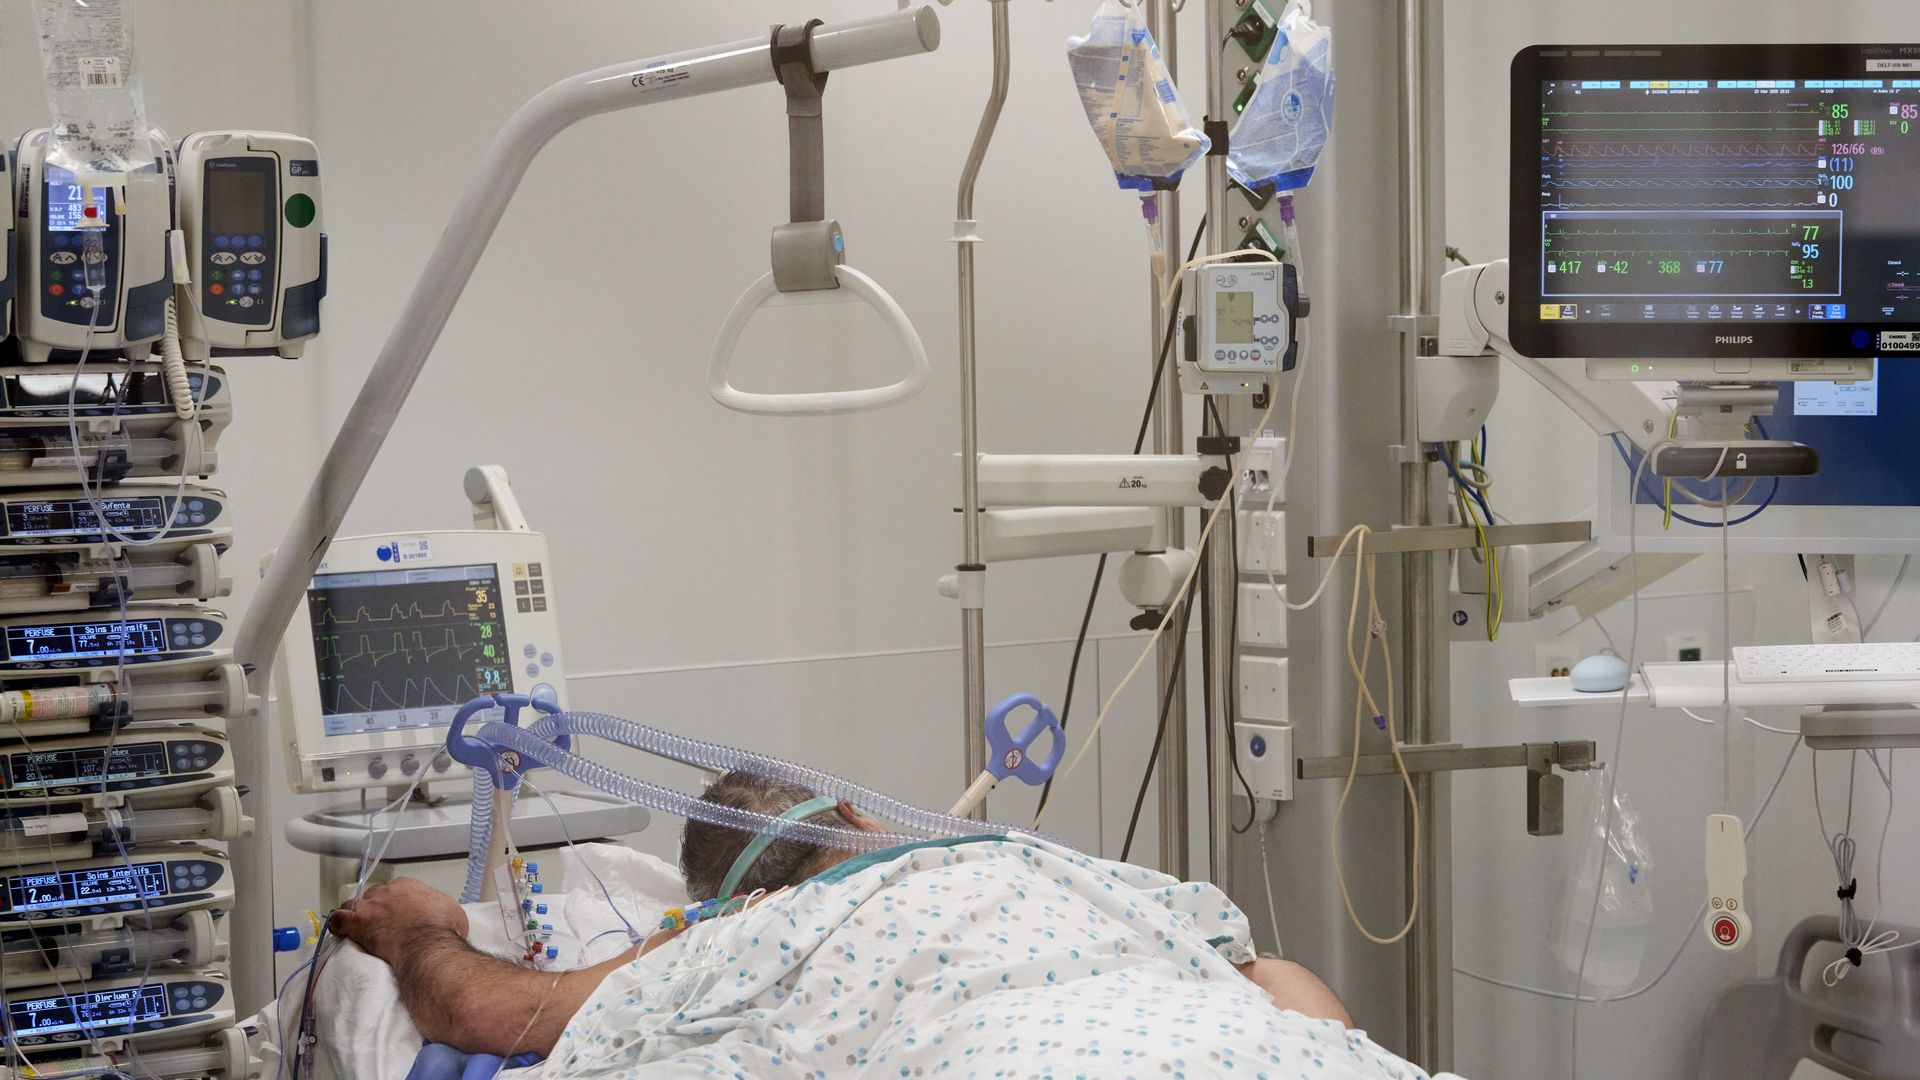 A man lays on a hospital bed in an intensive care unit with monitors and equipment surrounding him.